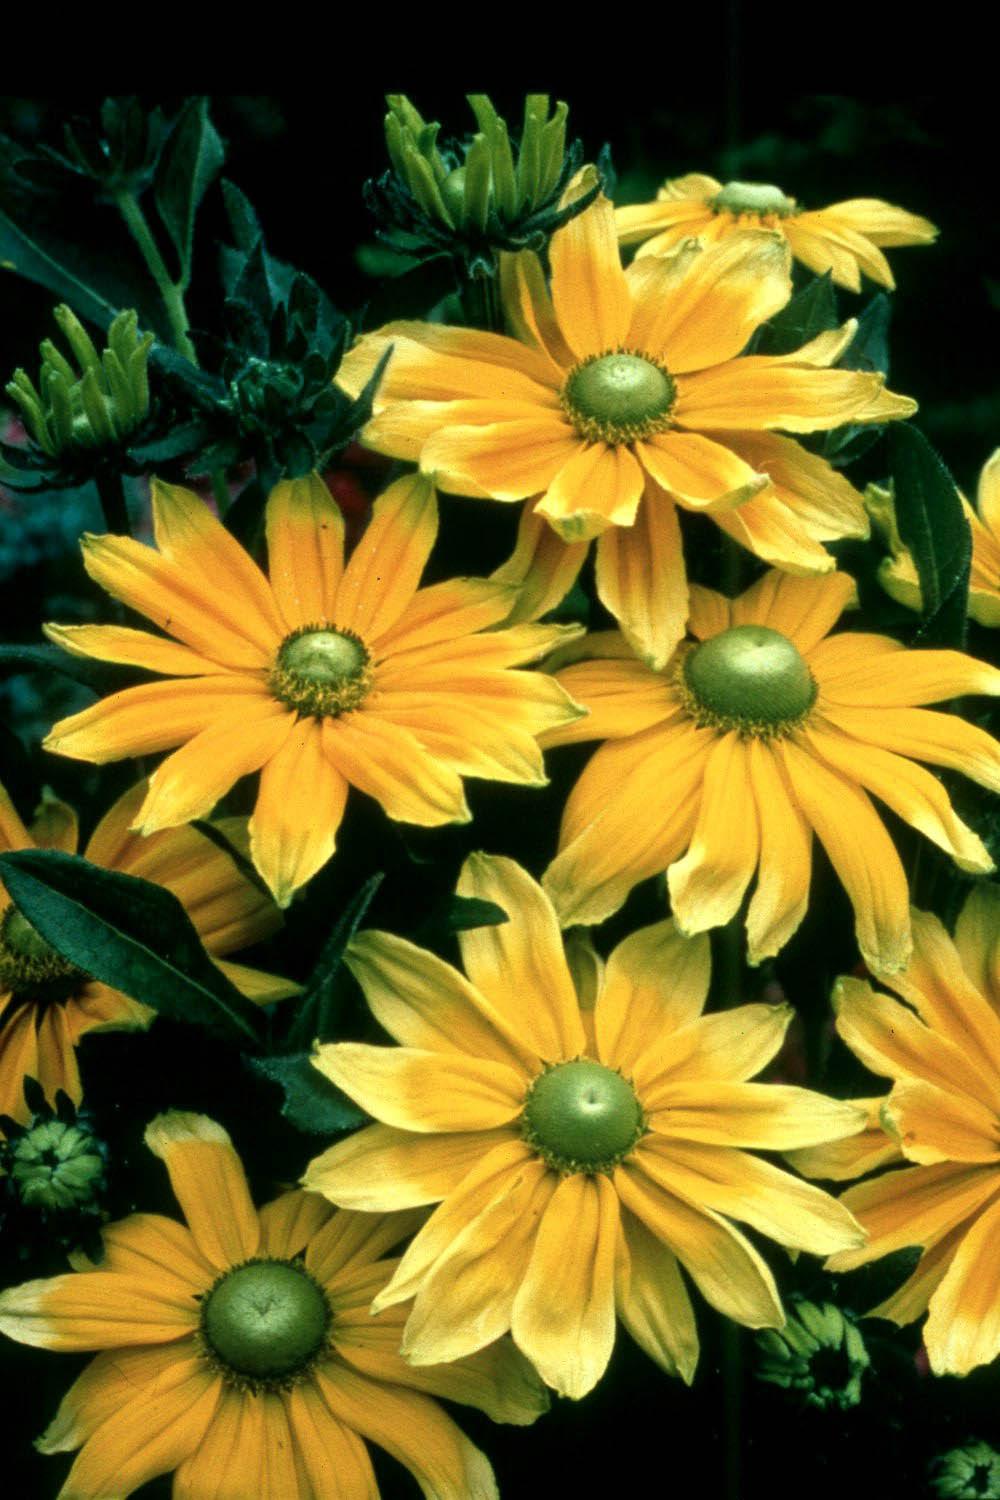 Prairie Sun, an All-America Selections winner this year, will reach from 24 to 36 inches in height and probably will be the most attractive flower in the landscape throughout a long blooming season. It produces 5- to 9-inch flowers on 18-inch stems. 